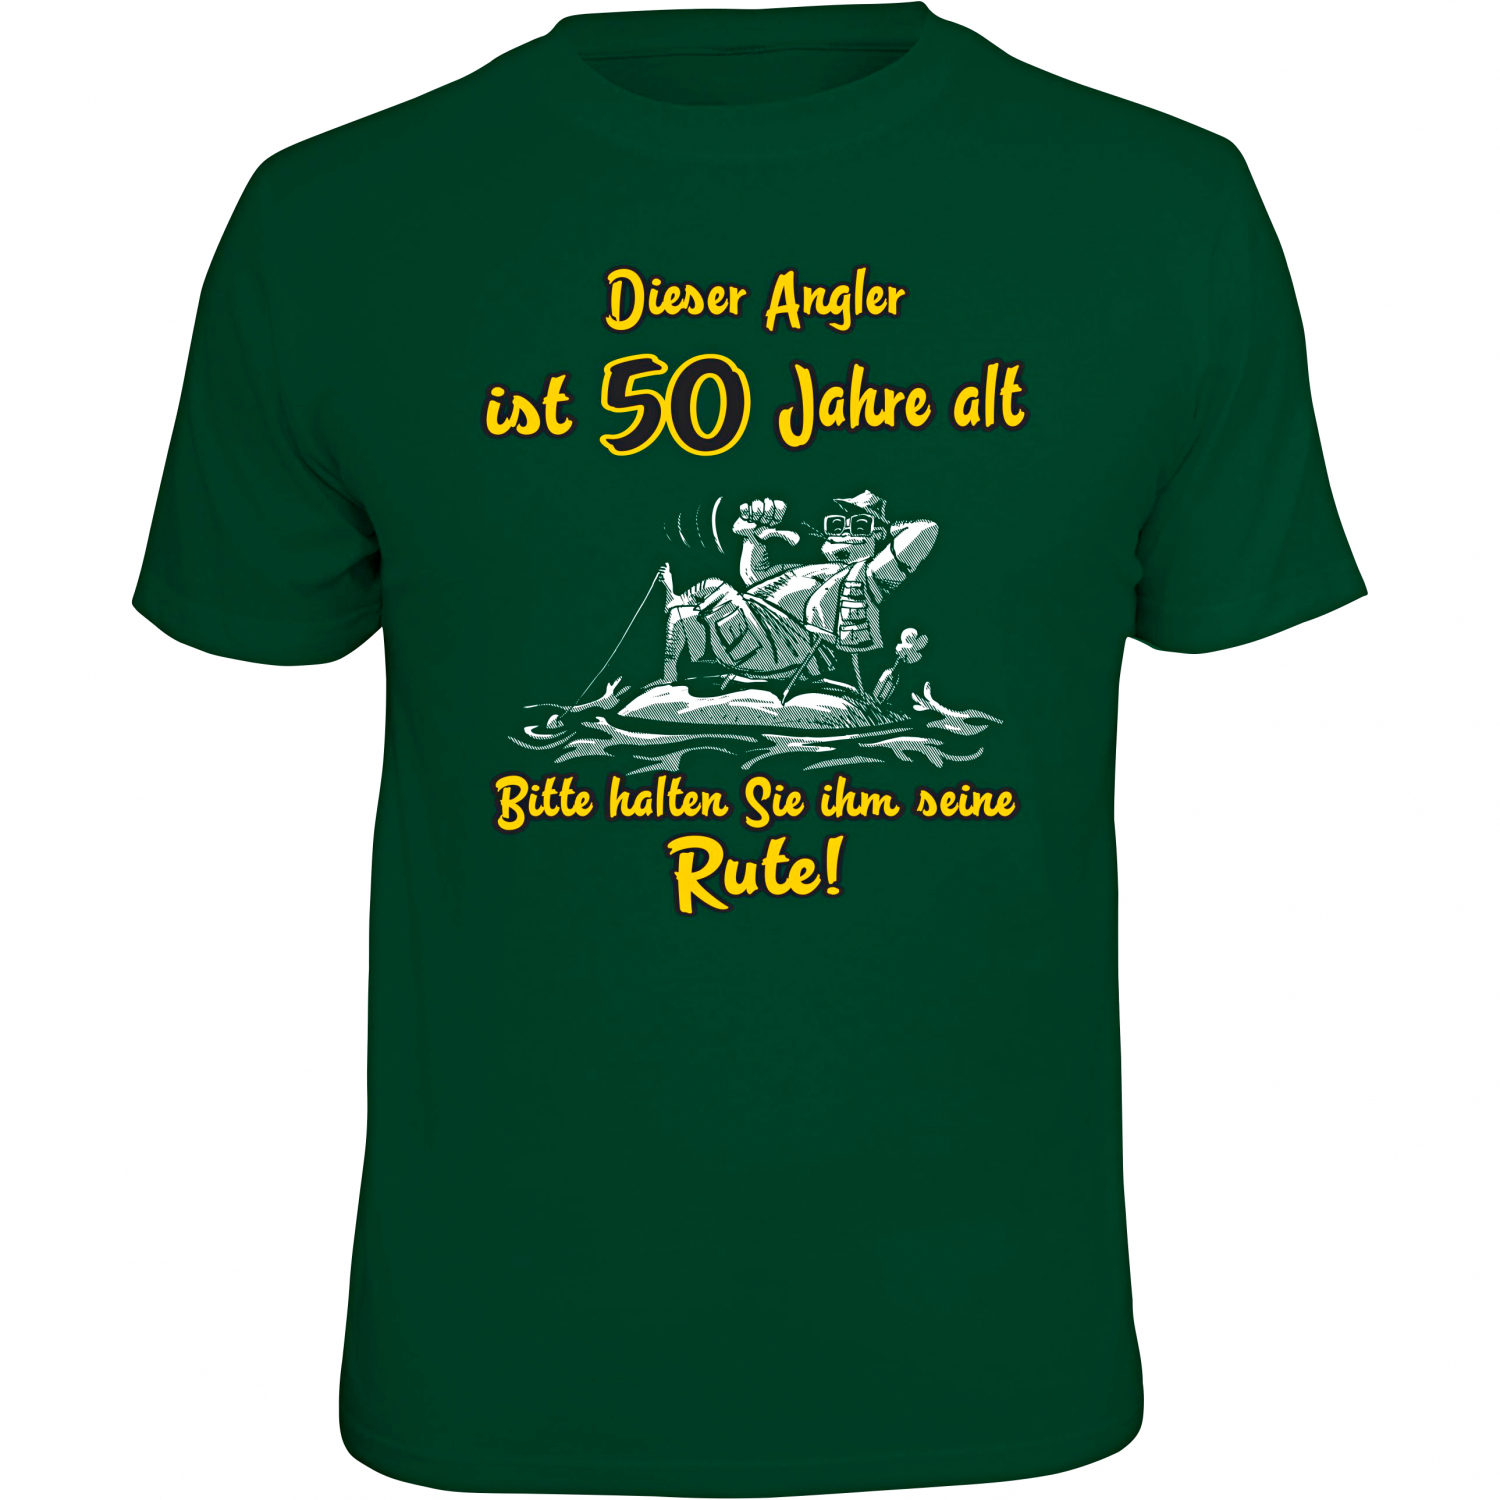 Rahmenlos Men's T-Shirt "This angler is 50 years old" (German version only) 